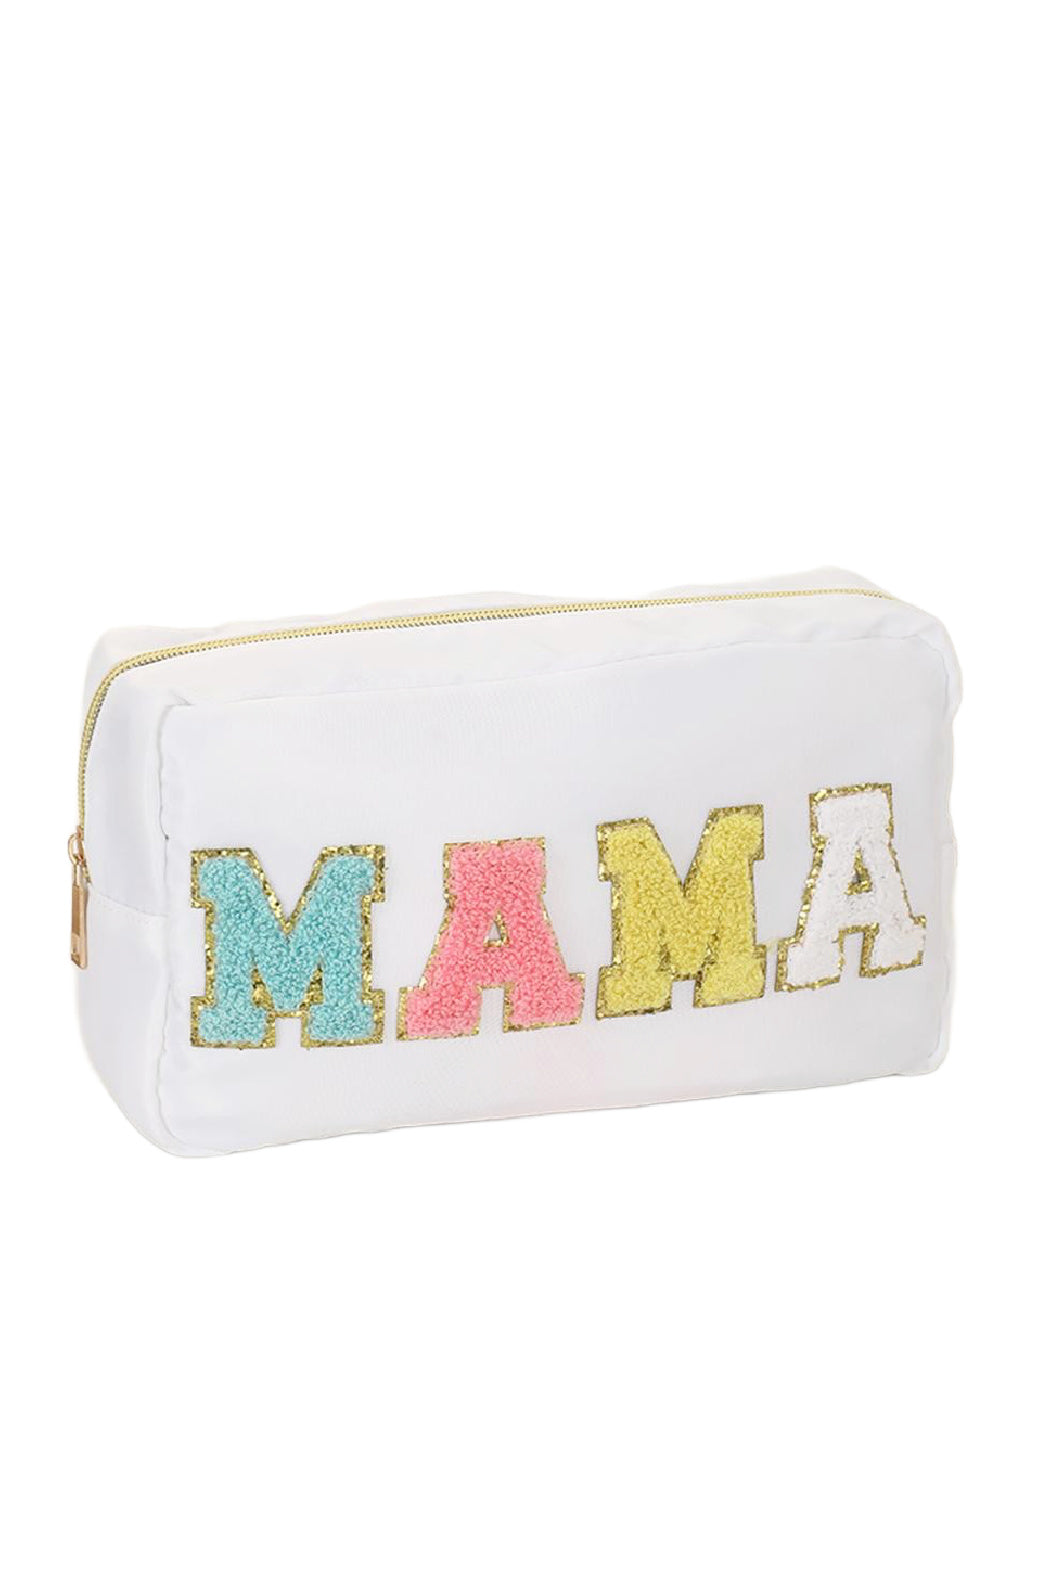 MAMA Chenille Letter Travel and Makeup Pouch